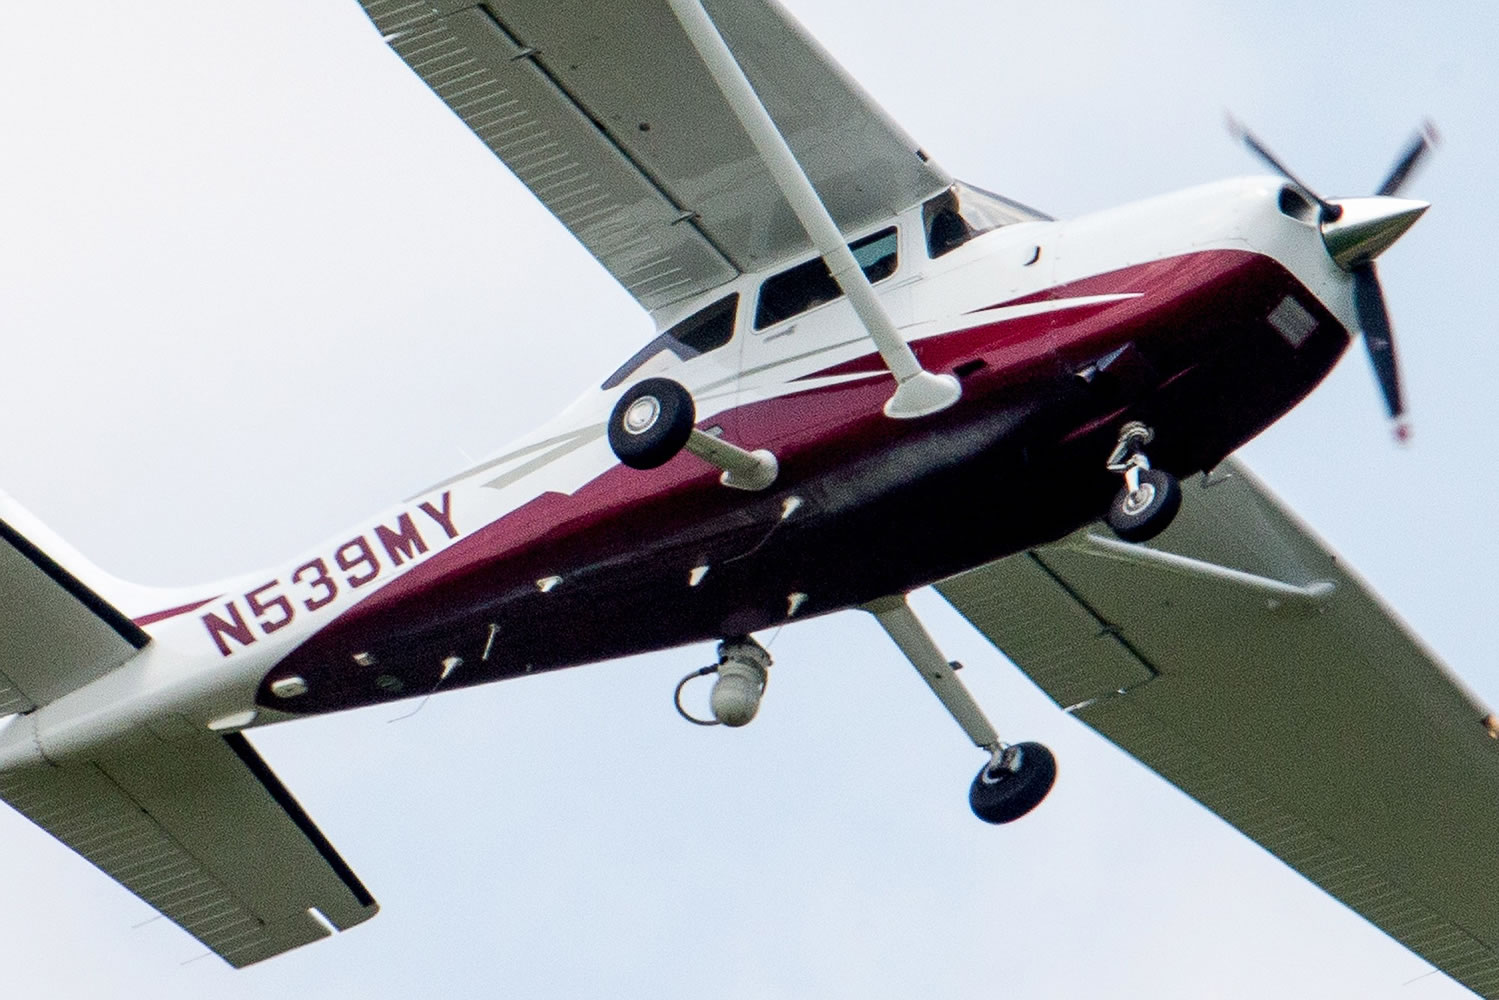 In this photo taken, a small plane flies May 26 near Manassas Regional Airport in Manassas, Va. The plane is among a fleet of surveillance aircraft used by the FBI, primarily to target suspects under federal investigation.